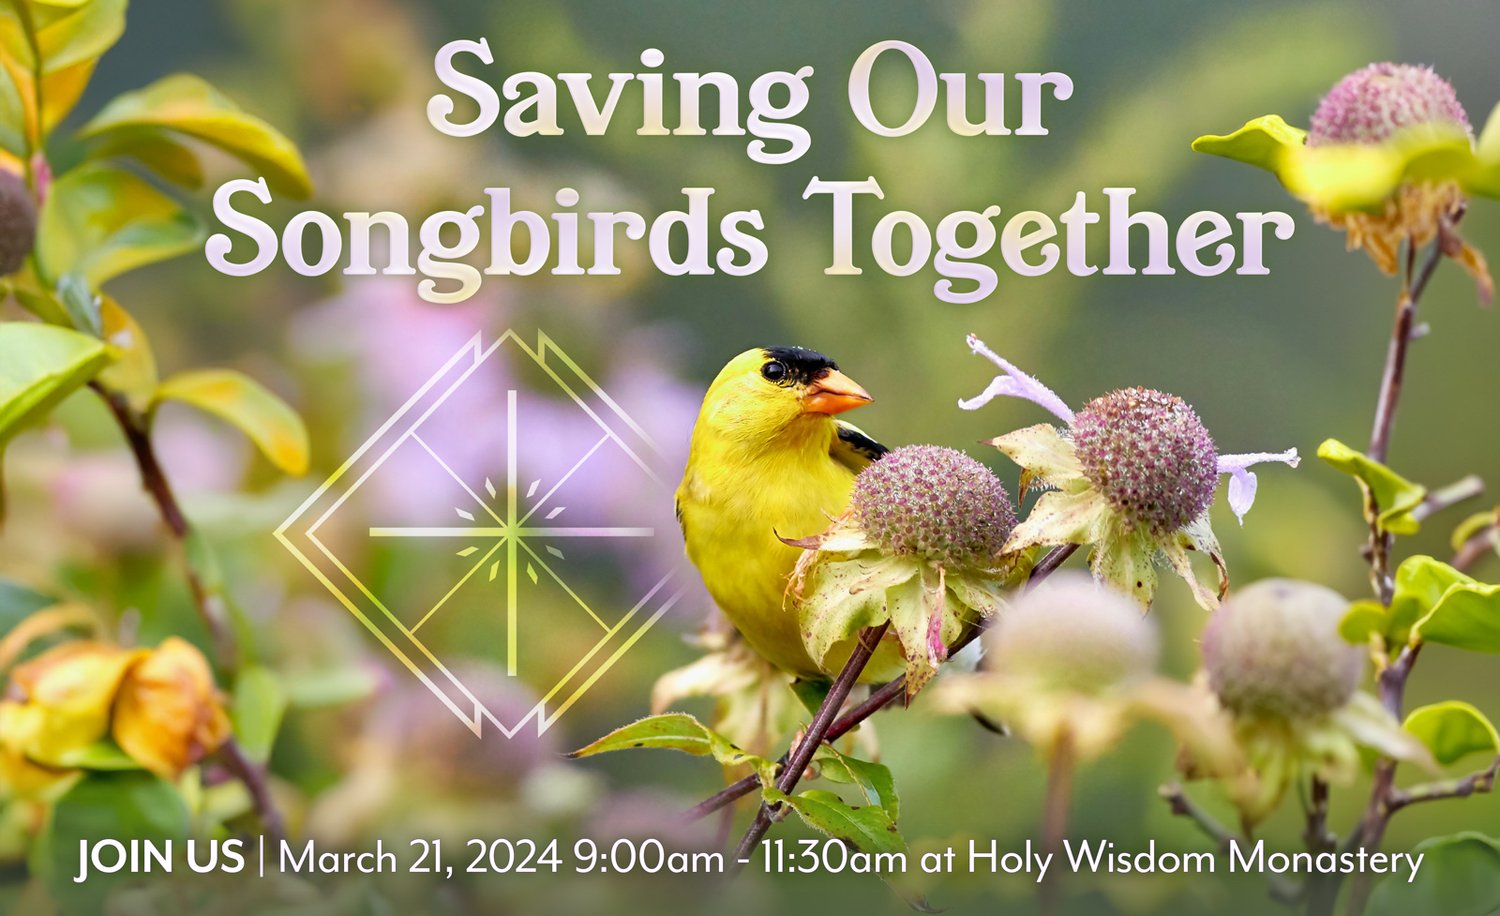 A bright yellow songbird on a plant with subtle purple flowers with promo info for Saving our Songbirds workshop.